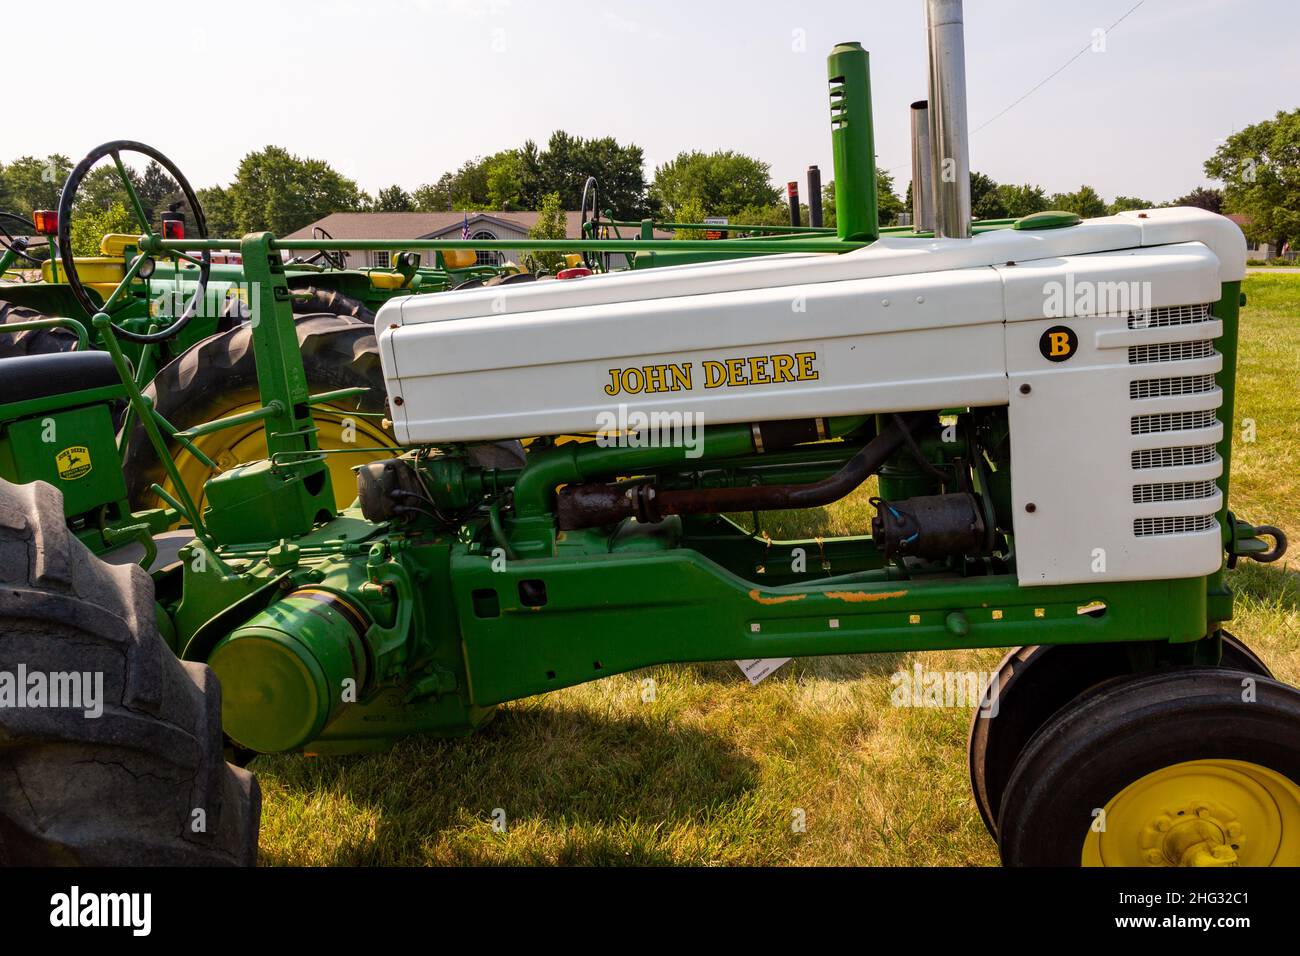 An antique John Deere Model B row crop farm tractor on display at a tractor show in Warren, Indiana, USA. Stock Photo